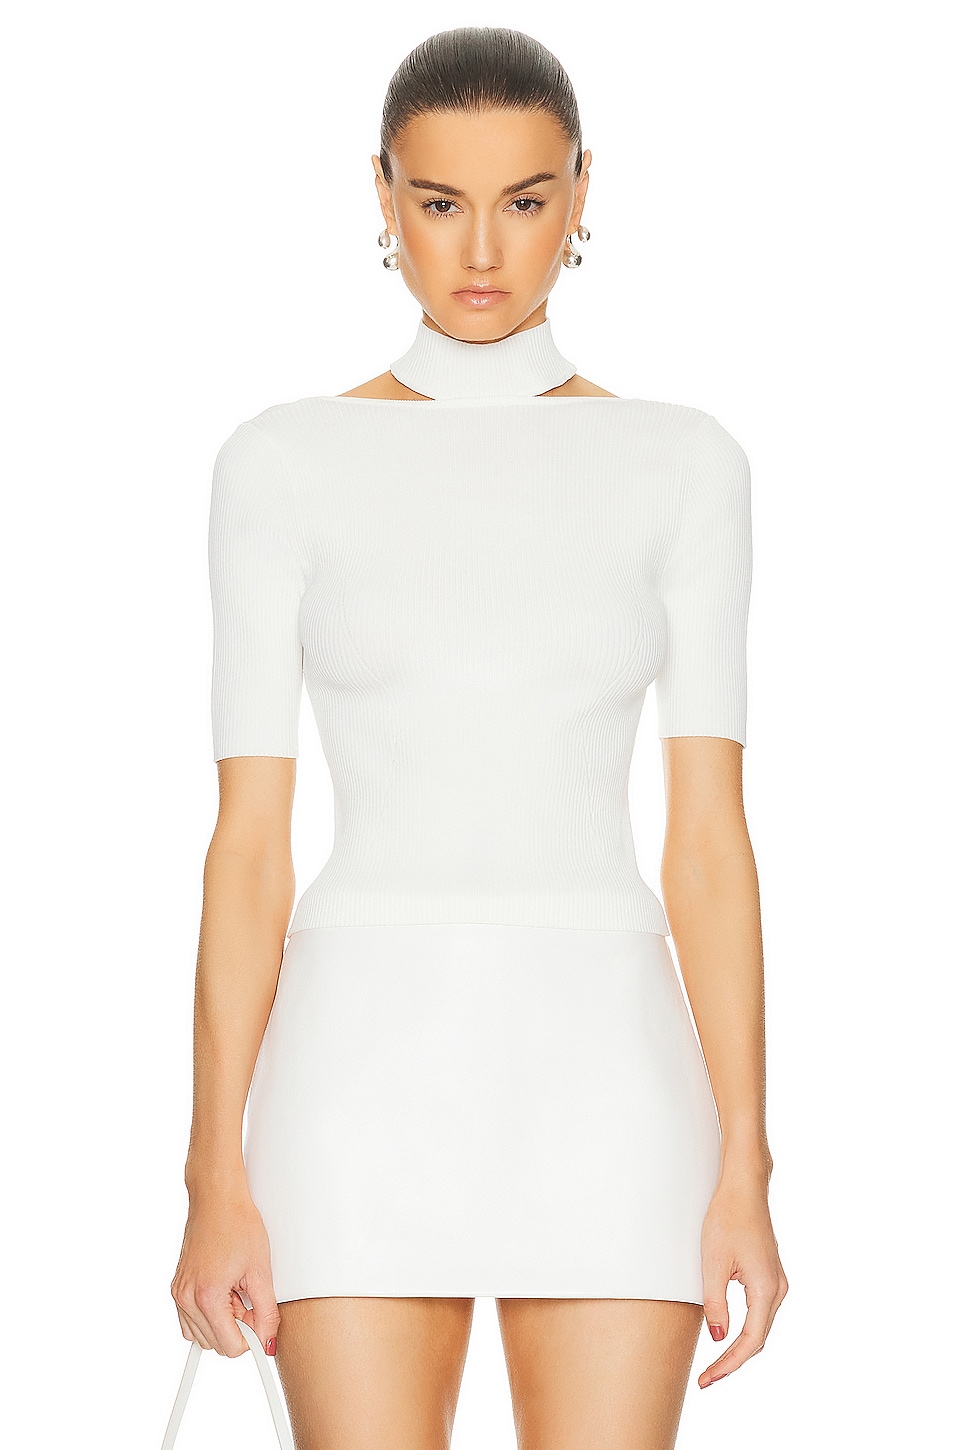 Image 1 of Cult Gaia Brianna Short Sleeve Knit Top in Off White